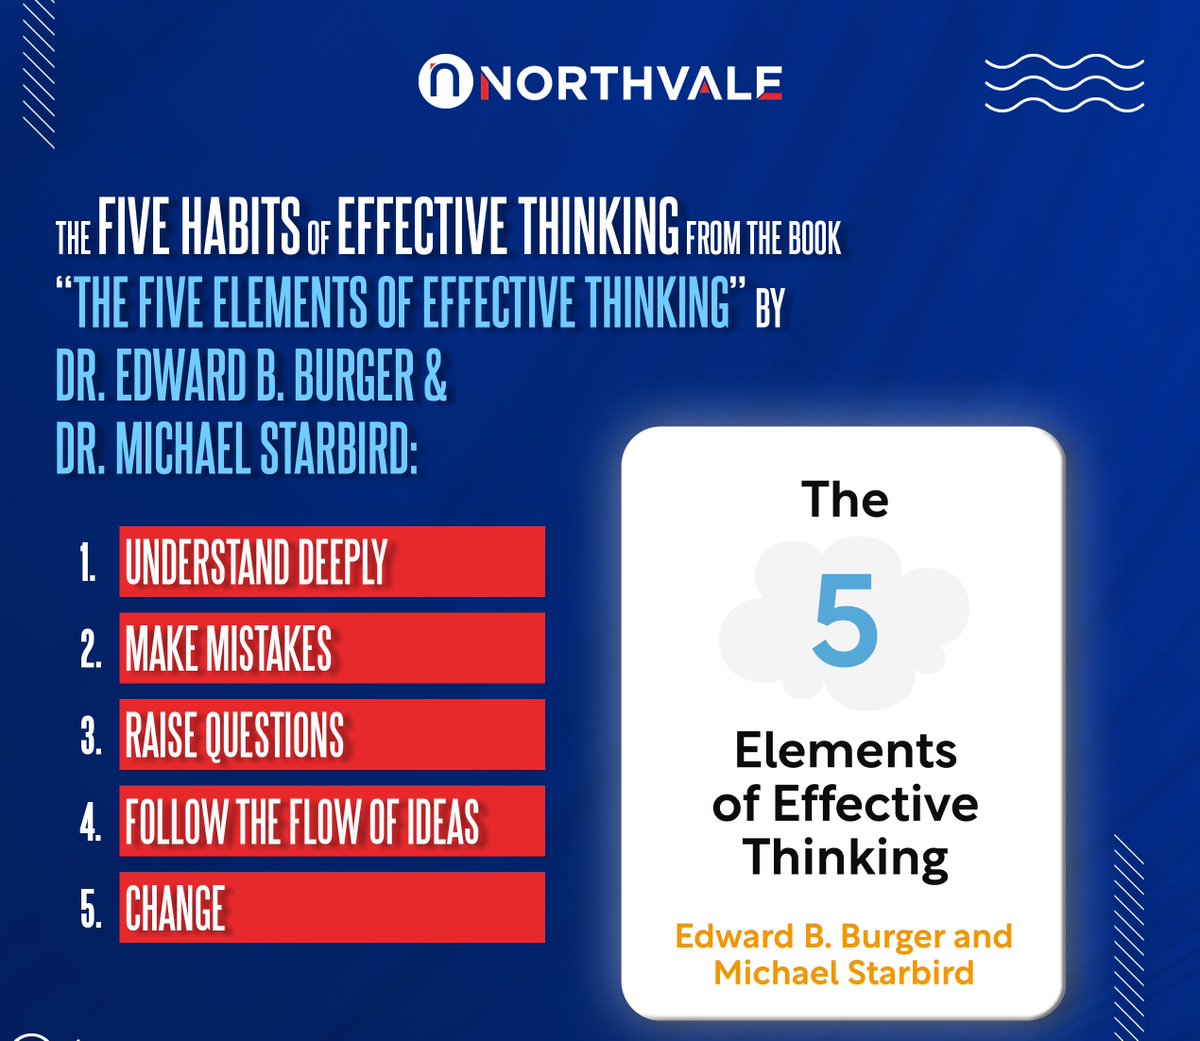 Unlock your mind's potential with 'The Five Elements of Effective Thinking' - understand deeply, make mistakes, raise questions, follow the flow of ideas, and embrace change. 

#EffectiveThinking #Mindfulness #PersonalGrowth #investing #inflation #stockmarkets #northvale